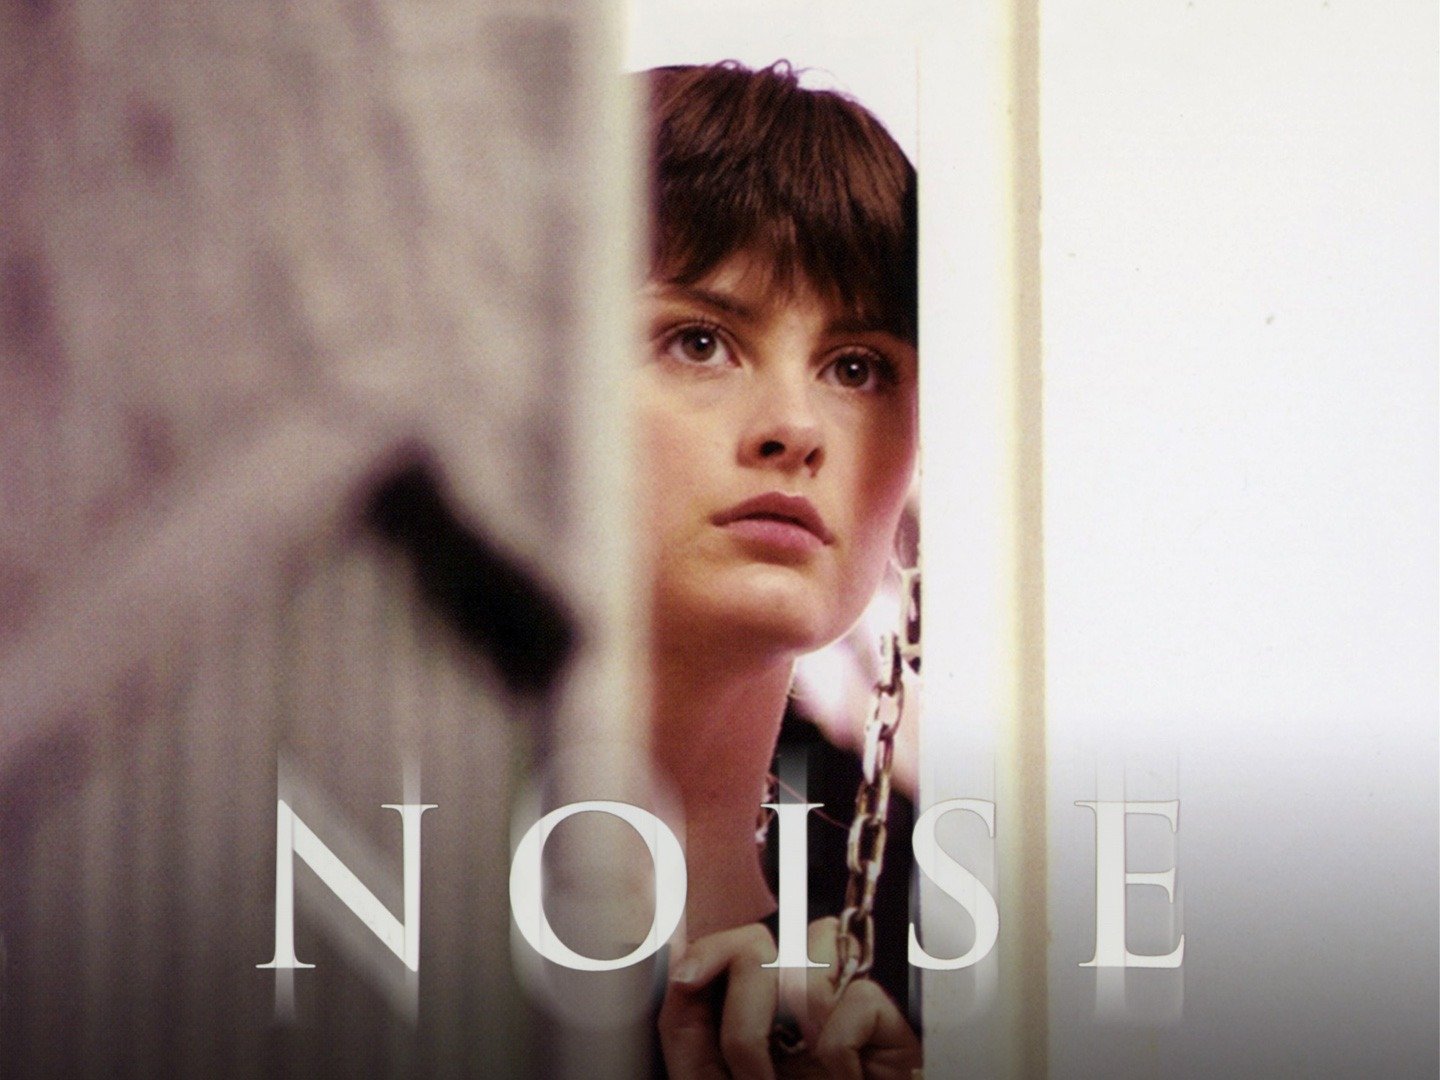 the noise movie review